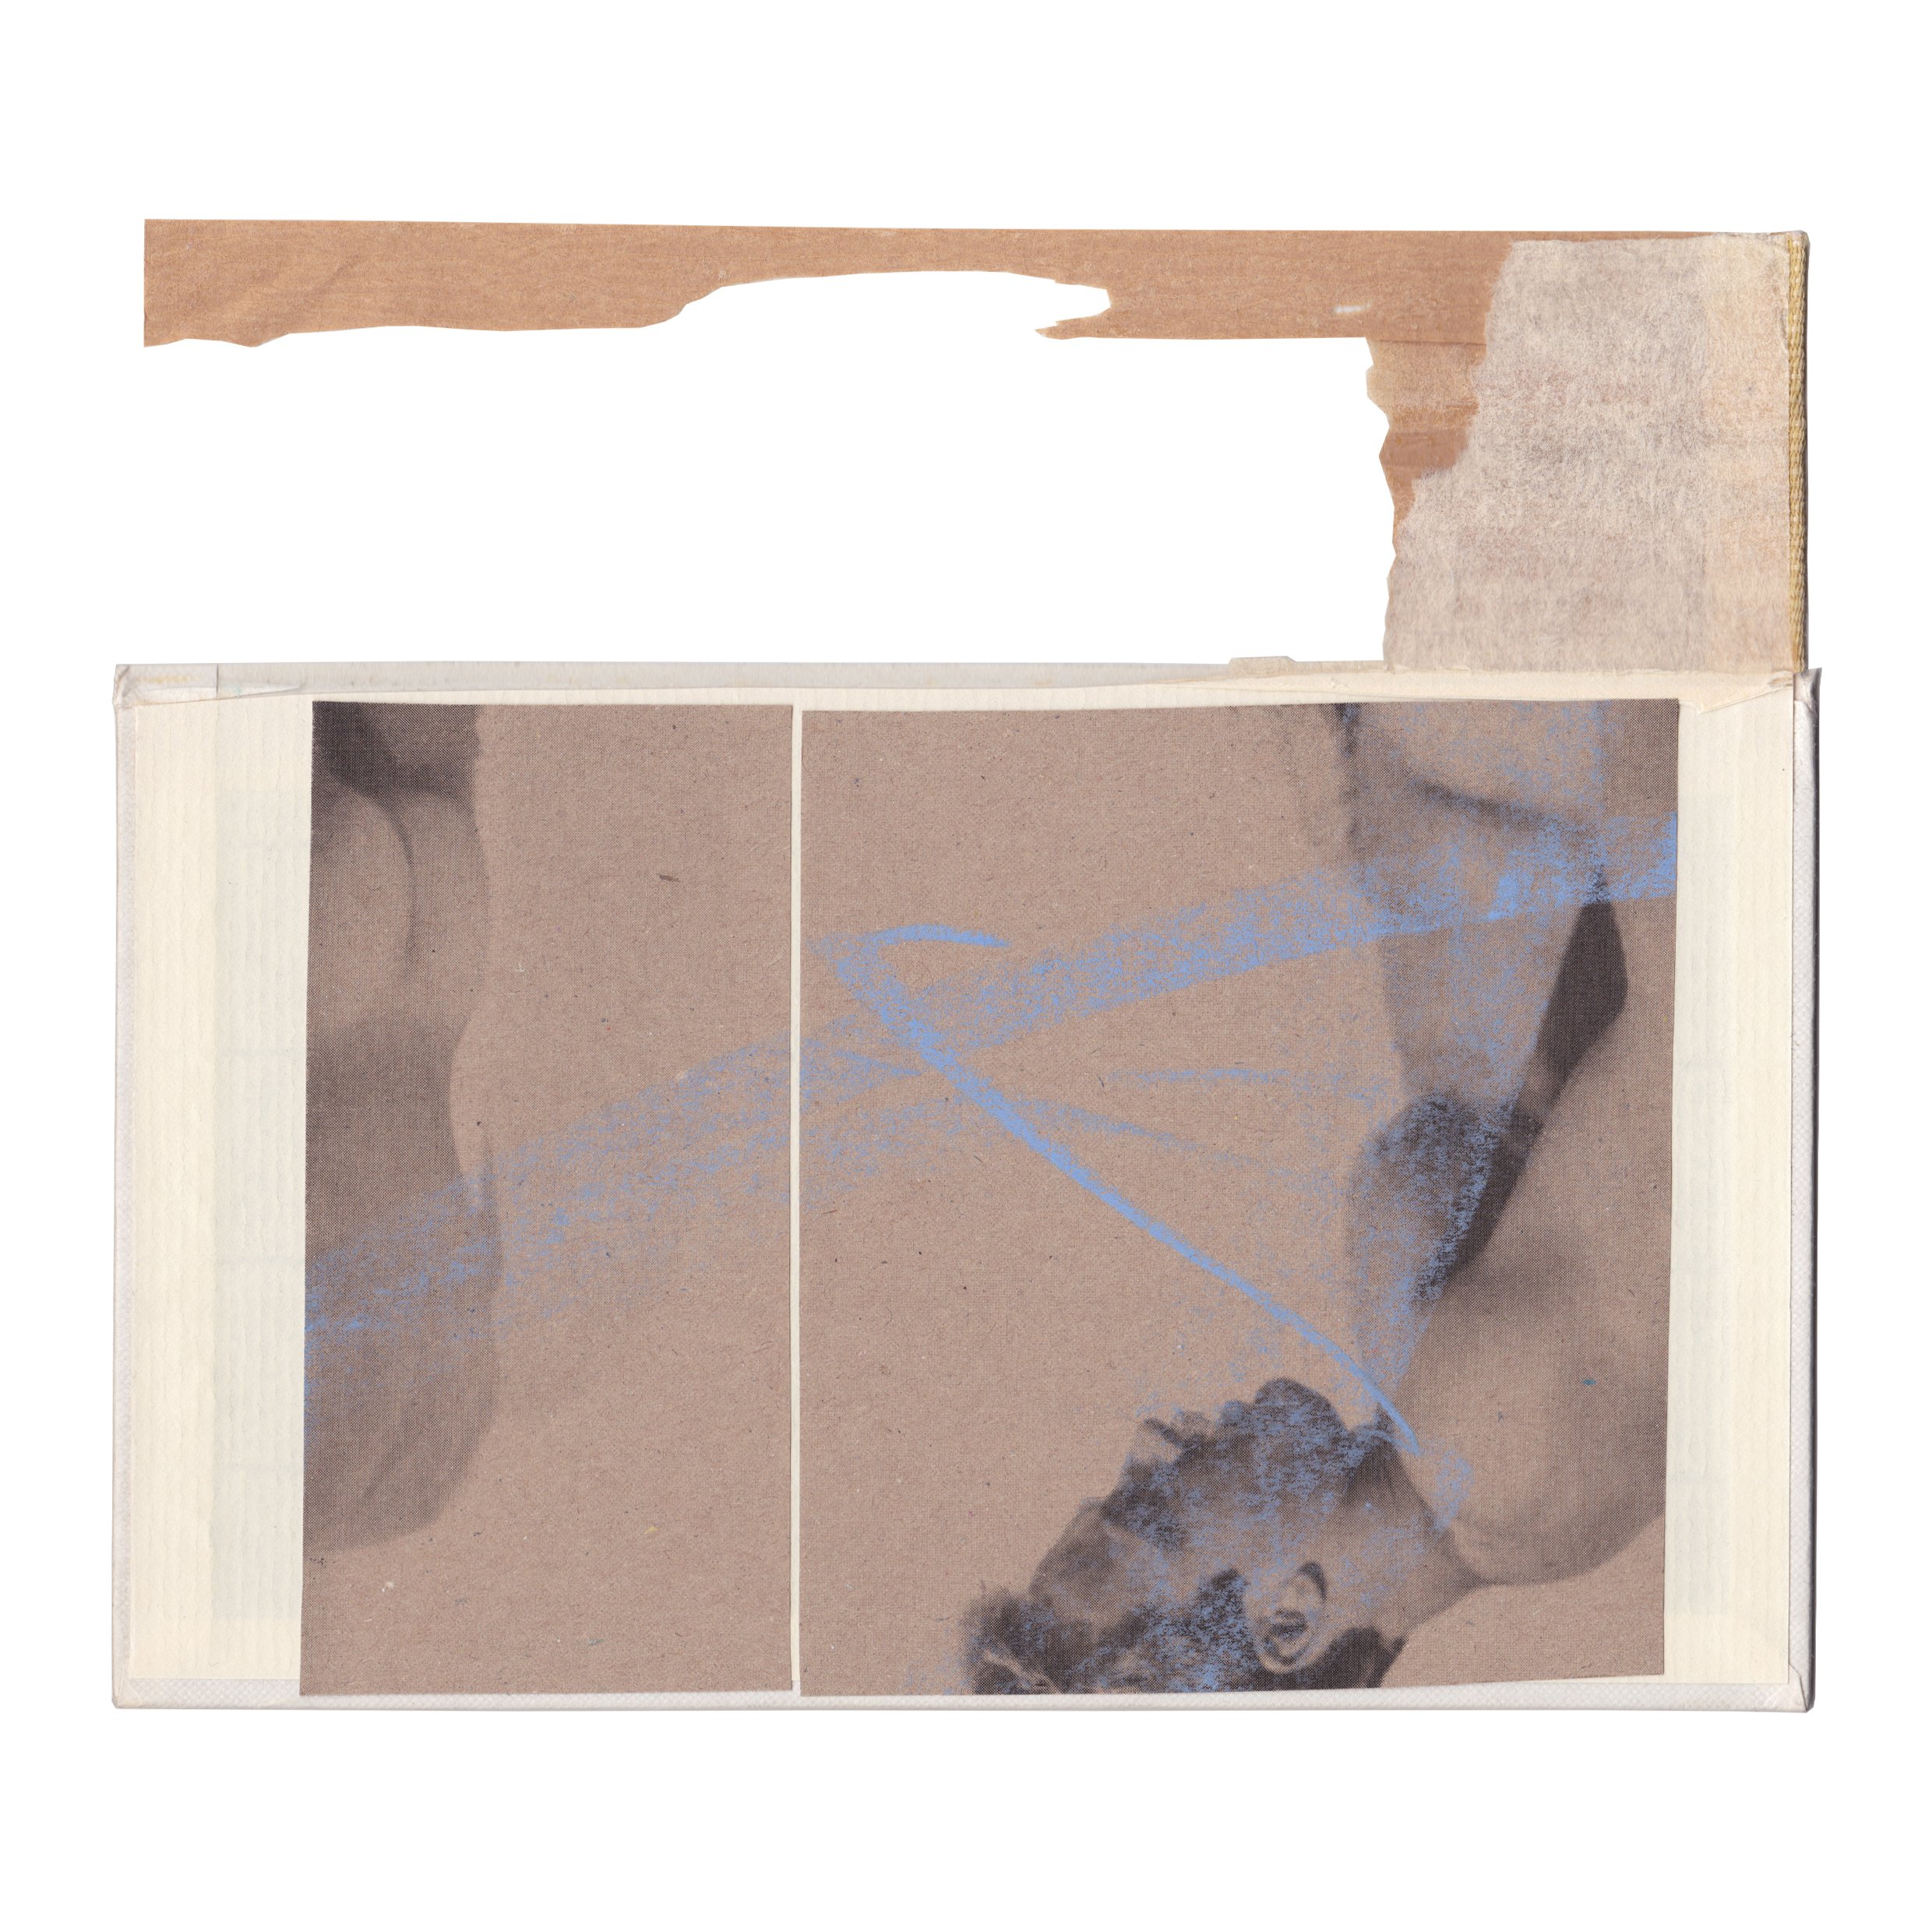  FRAGMENTS - paper collage, crayon on vintage book cover, signed on the back  (2022)  (20,7x18cm) 